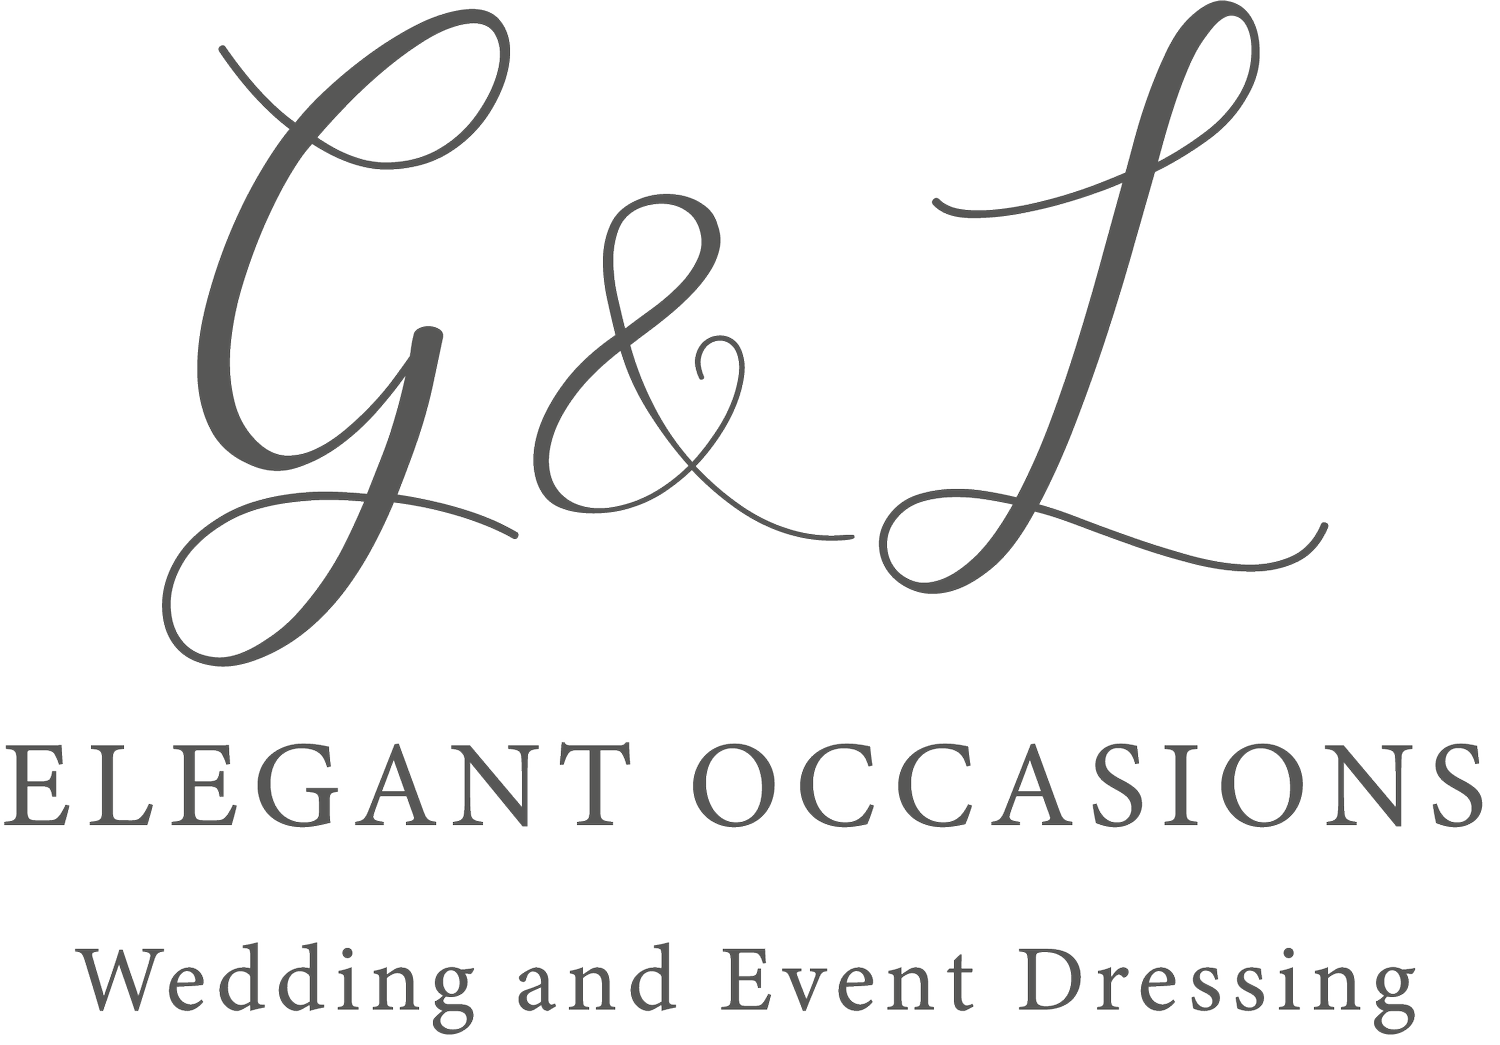 G&amp;L Elegant Occasions - Wedding and Event Dressing